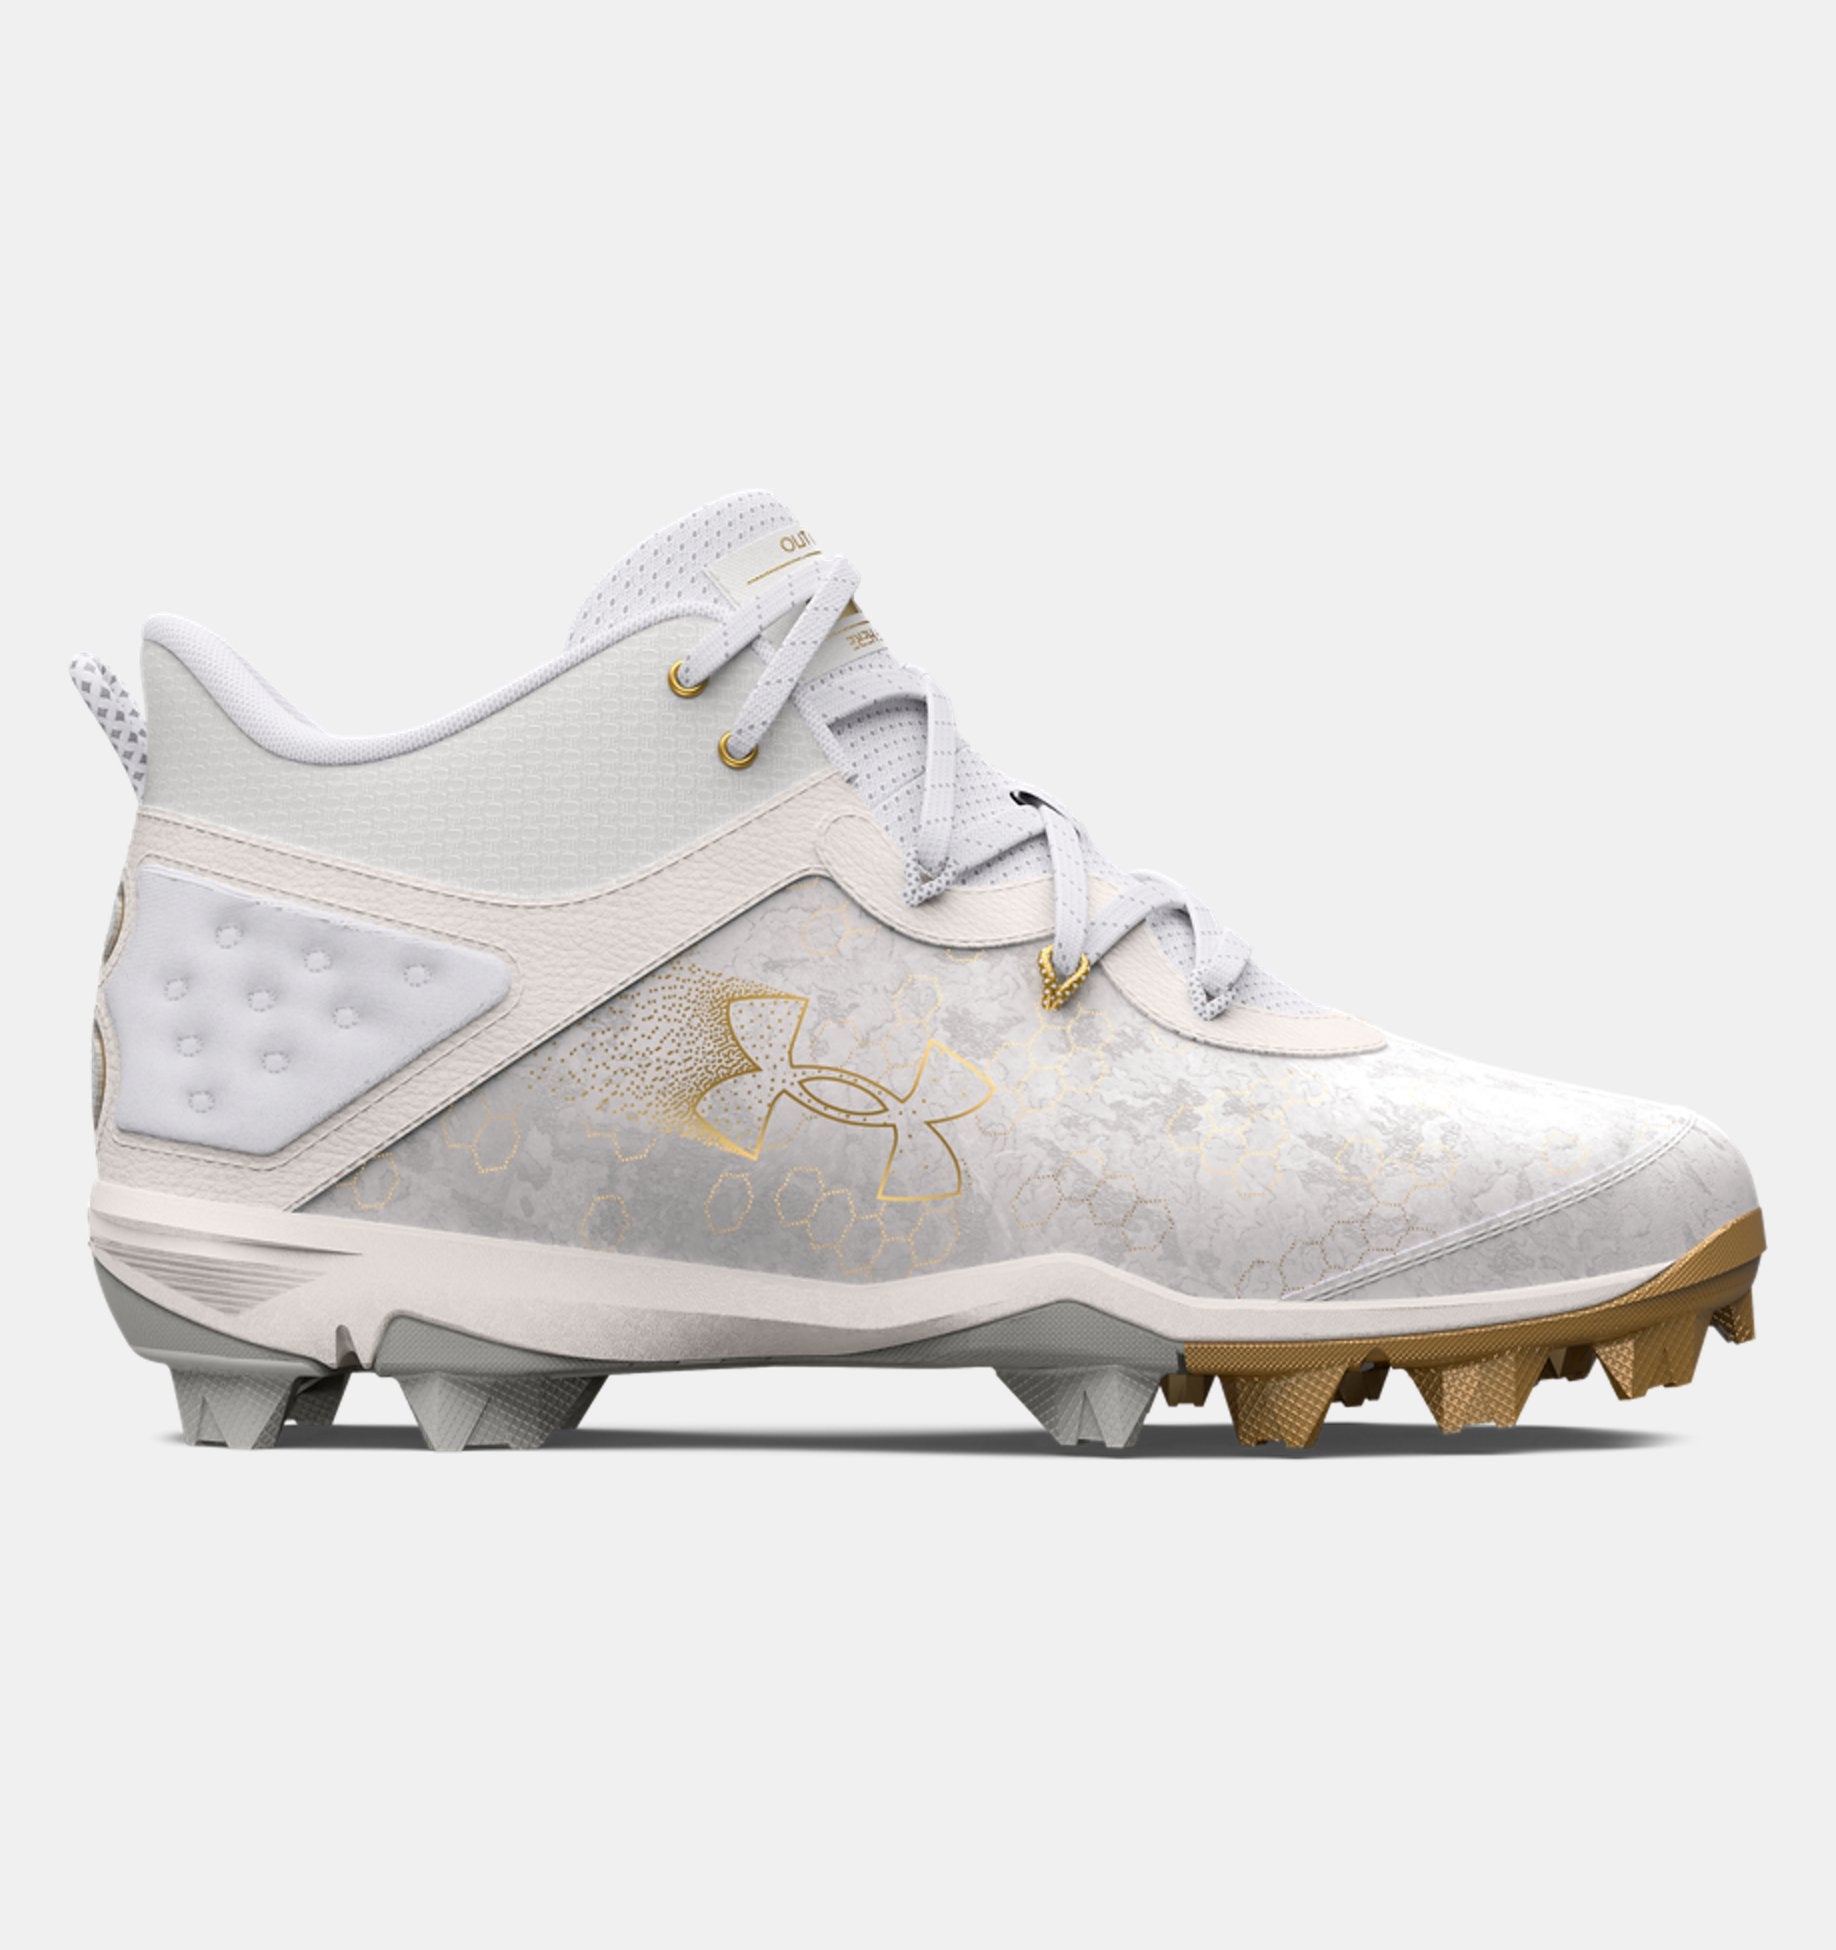 Under Armour Harper 8 Mid RM Baseball Cleats Footwear Under Armour White/White/Metallic Gold-100 6.5 